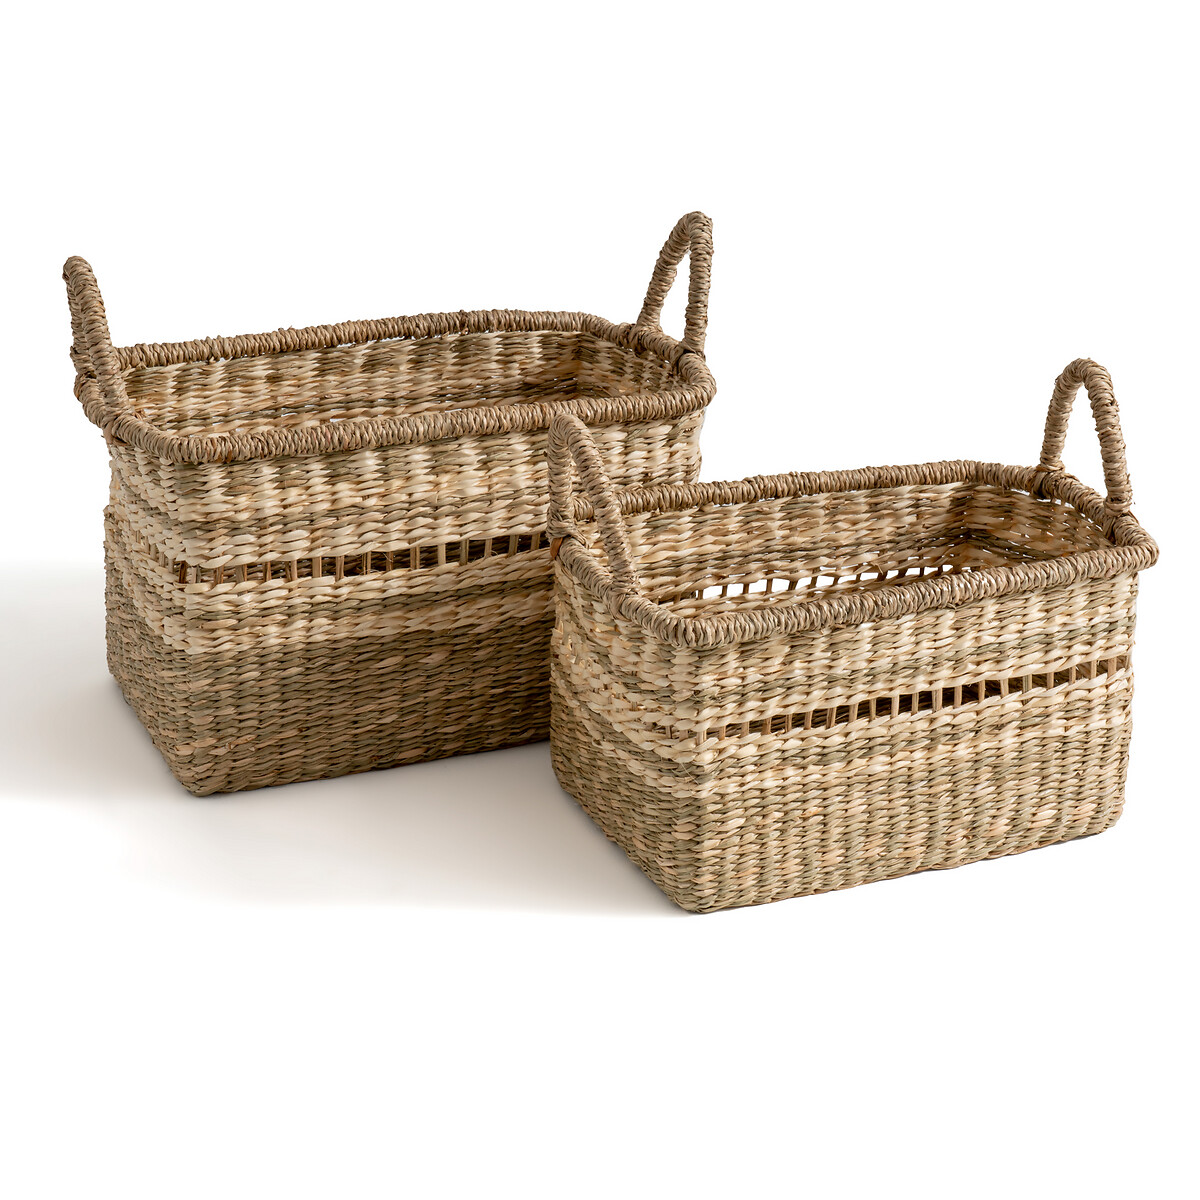 Set of 2 Sola Woven Straw Baskets